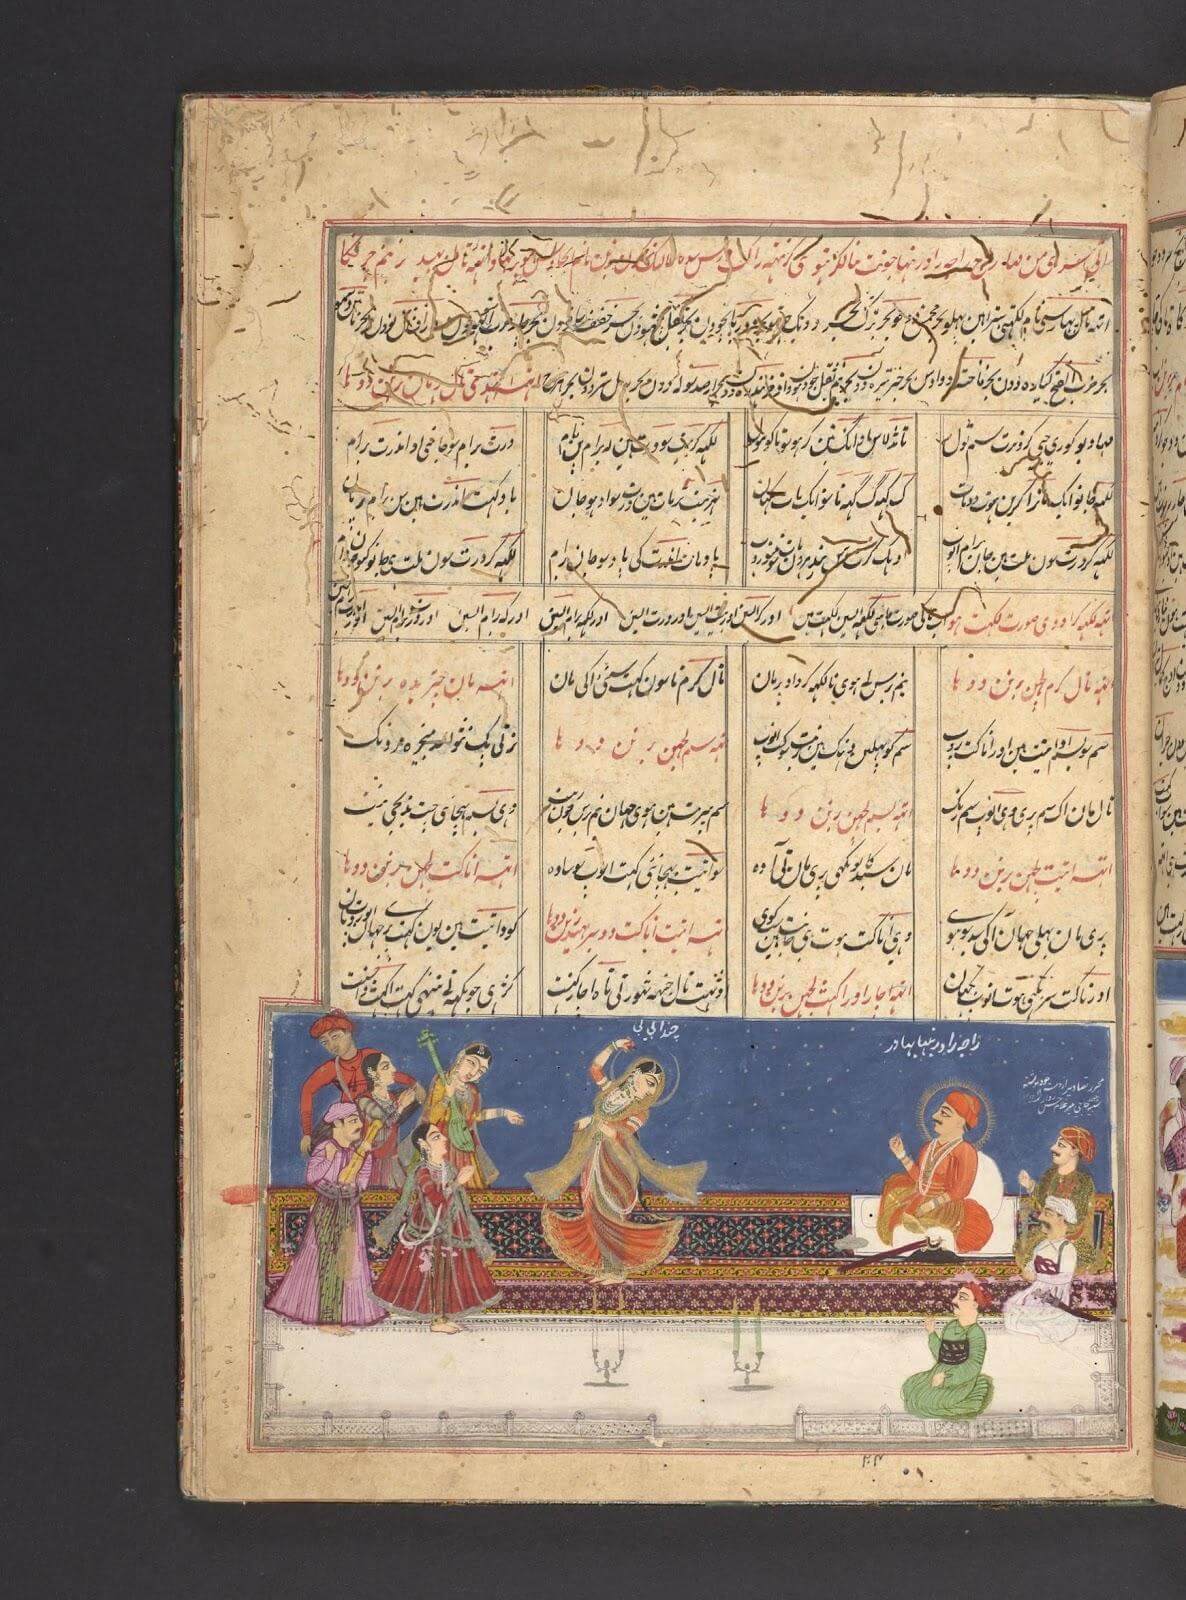 Figure 5: Detail of Mah Laqa Bai dancing, labelled ‘Chanda Bibi’. Khushhal Khan’s Rag Darshan, fol. 24r. Opaque watercolour, gold and ink on paper. Folio dimensions 36.2x25cm. Circa 1799-1804. From the Lawrence. J. Schoenberg Collection, University of Pennsylvania Libraries. UPenn LJS 63. Raja Rao Ranbahadur is also depicted with a halo.